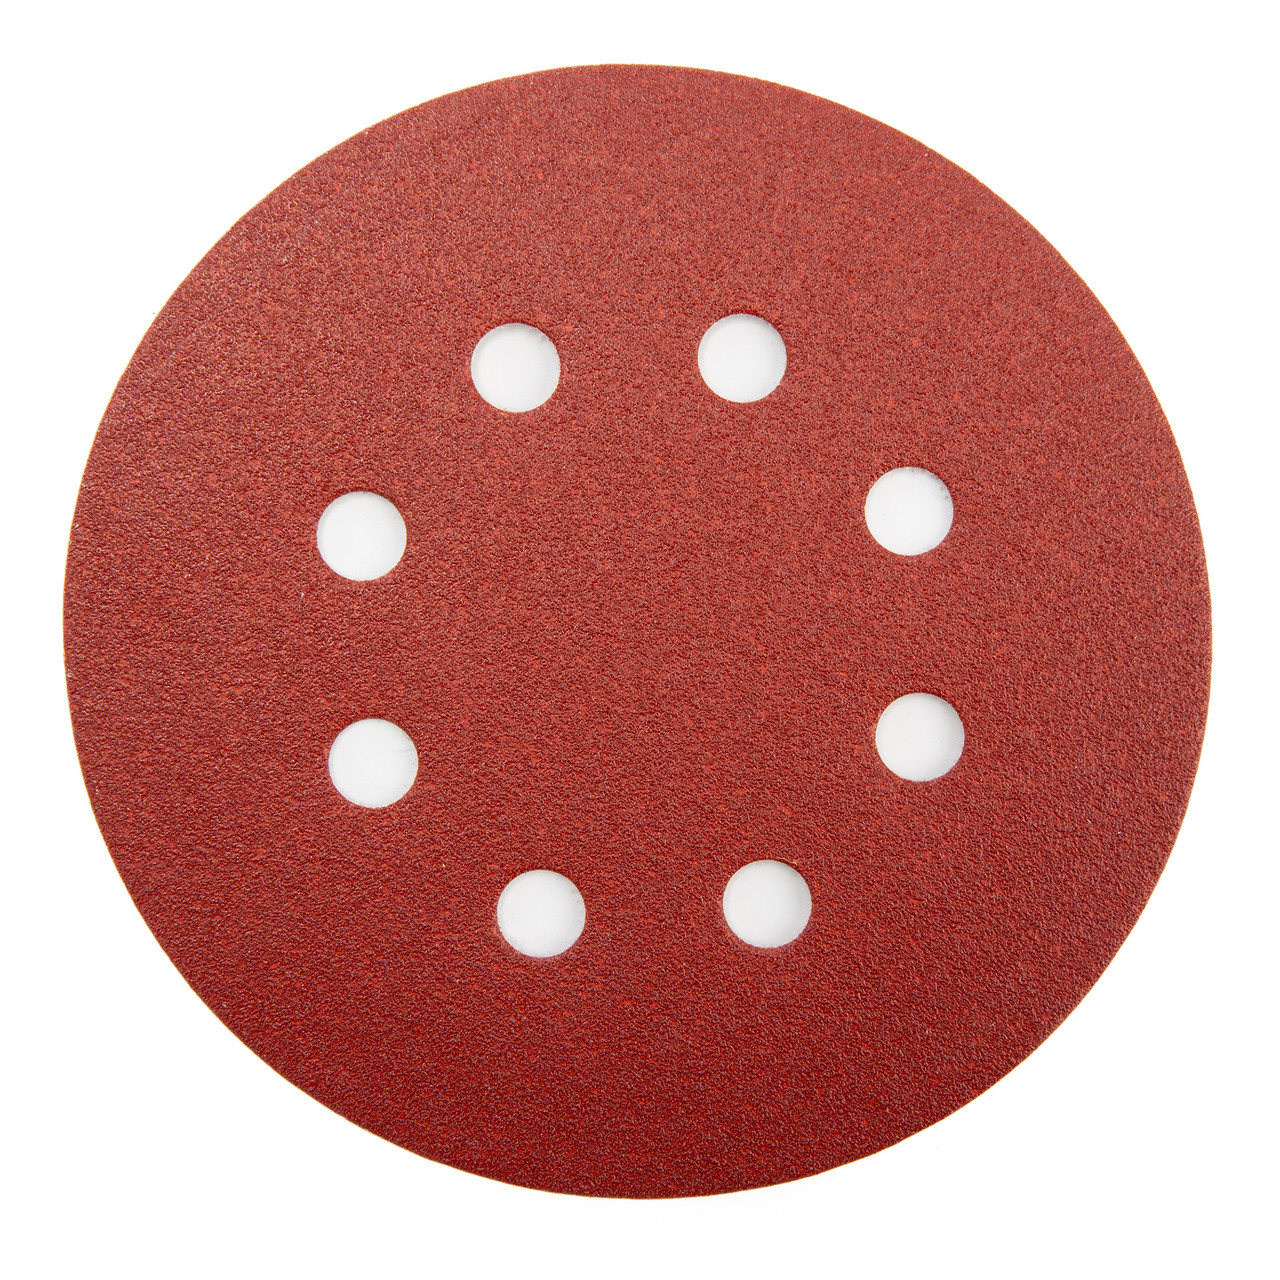 Photos - Other Components Makita P-43583 Sanding Discs 125mm 180 Grit  (Pack Of 10)